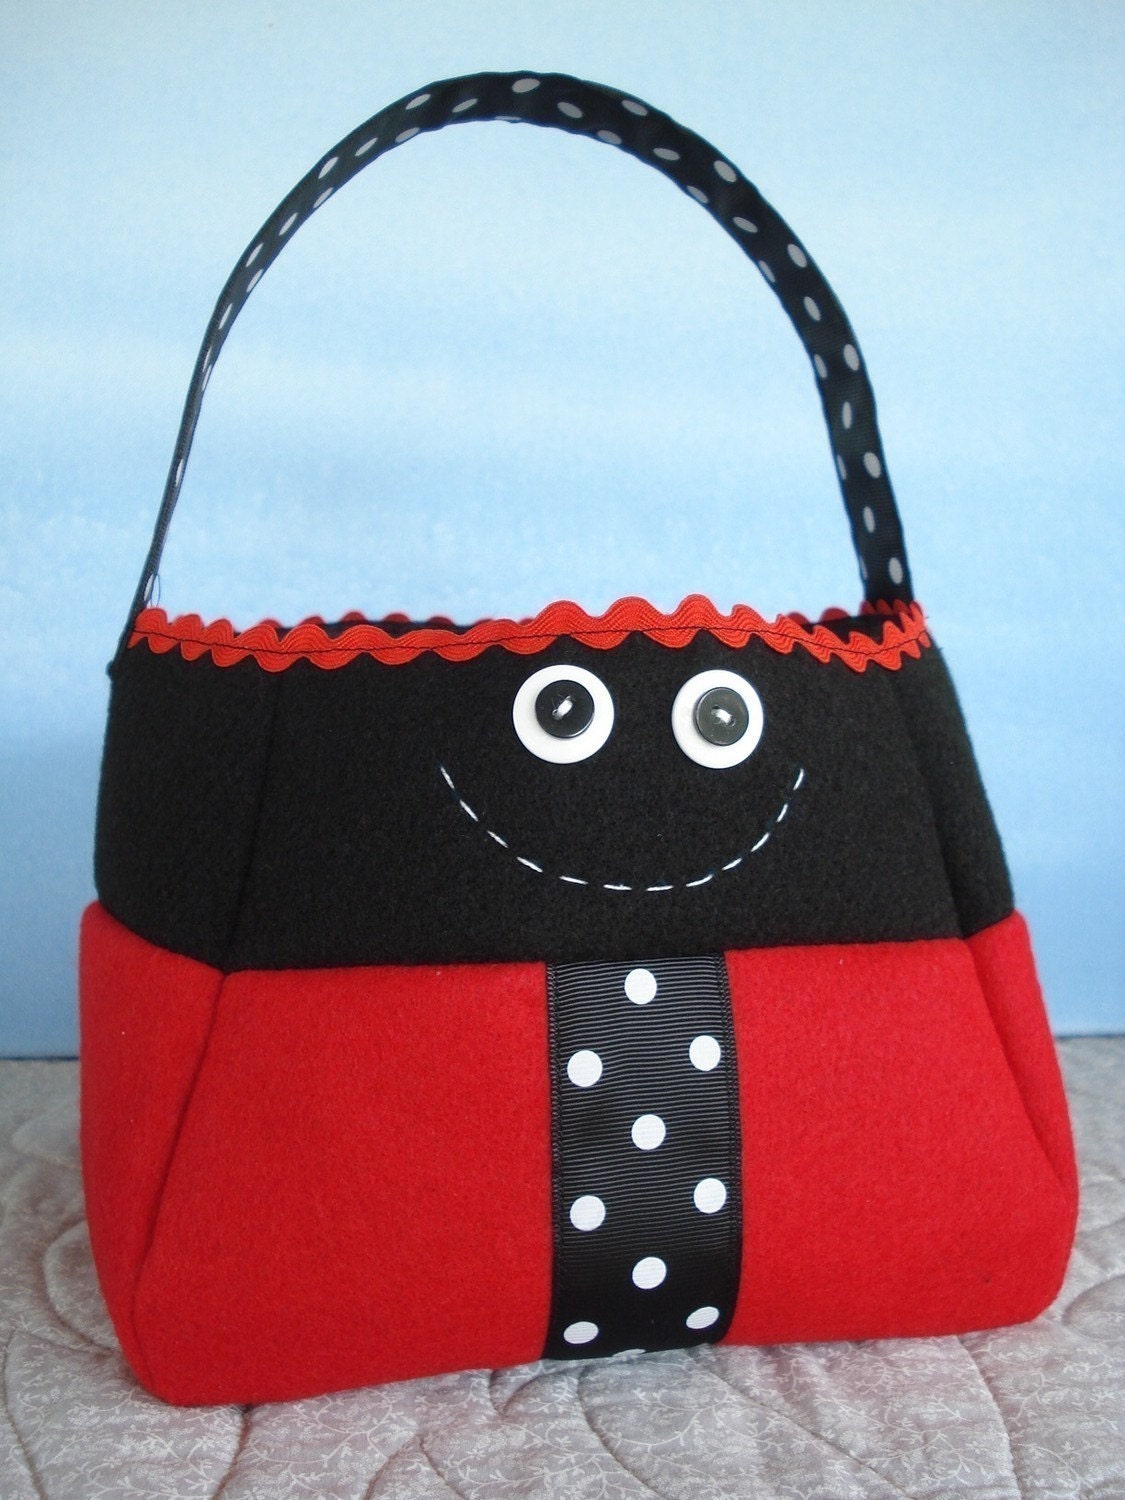 SALE - PDF ePATTERN for Bumble Bee and Ladybug Treat Bags